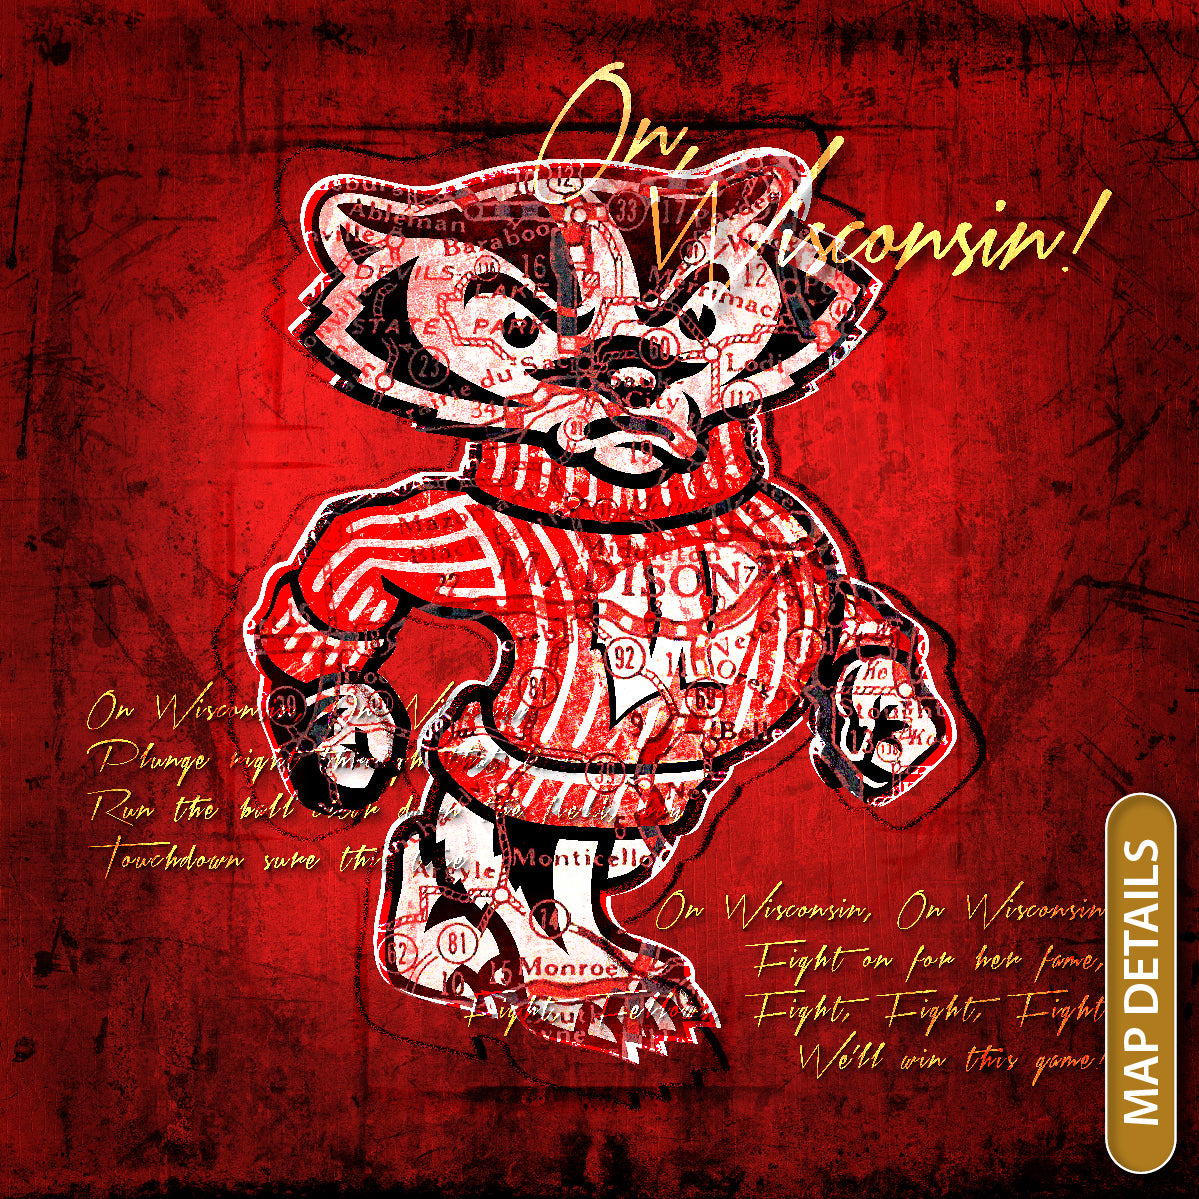 Wisconsin Badgers Vintage Canvas Map | Bucky Badger Fight Song Lyrics